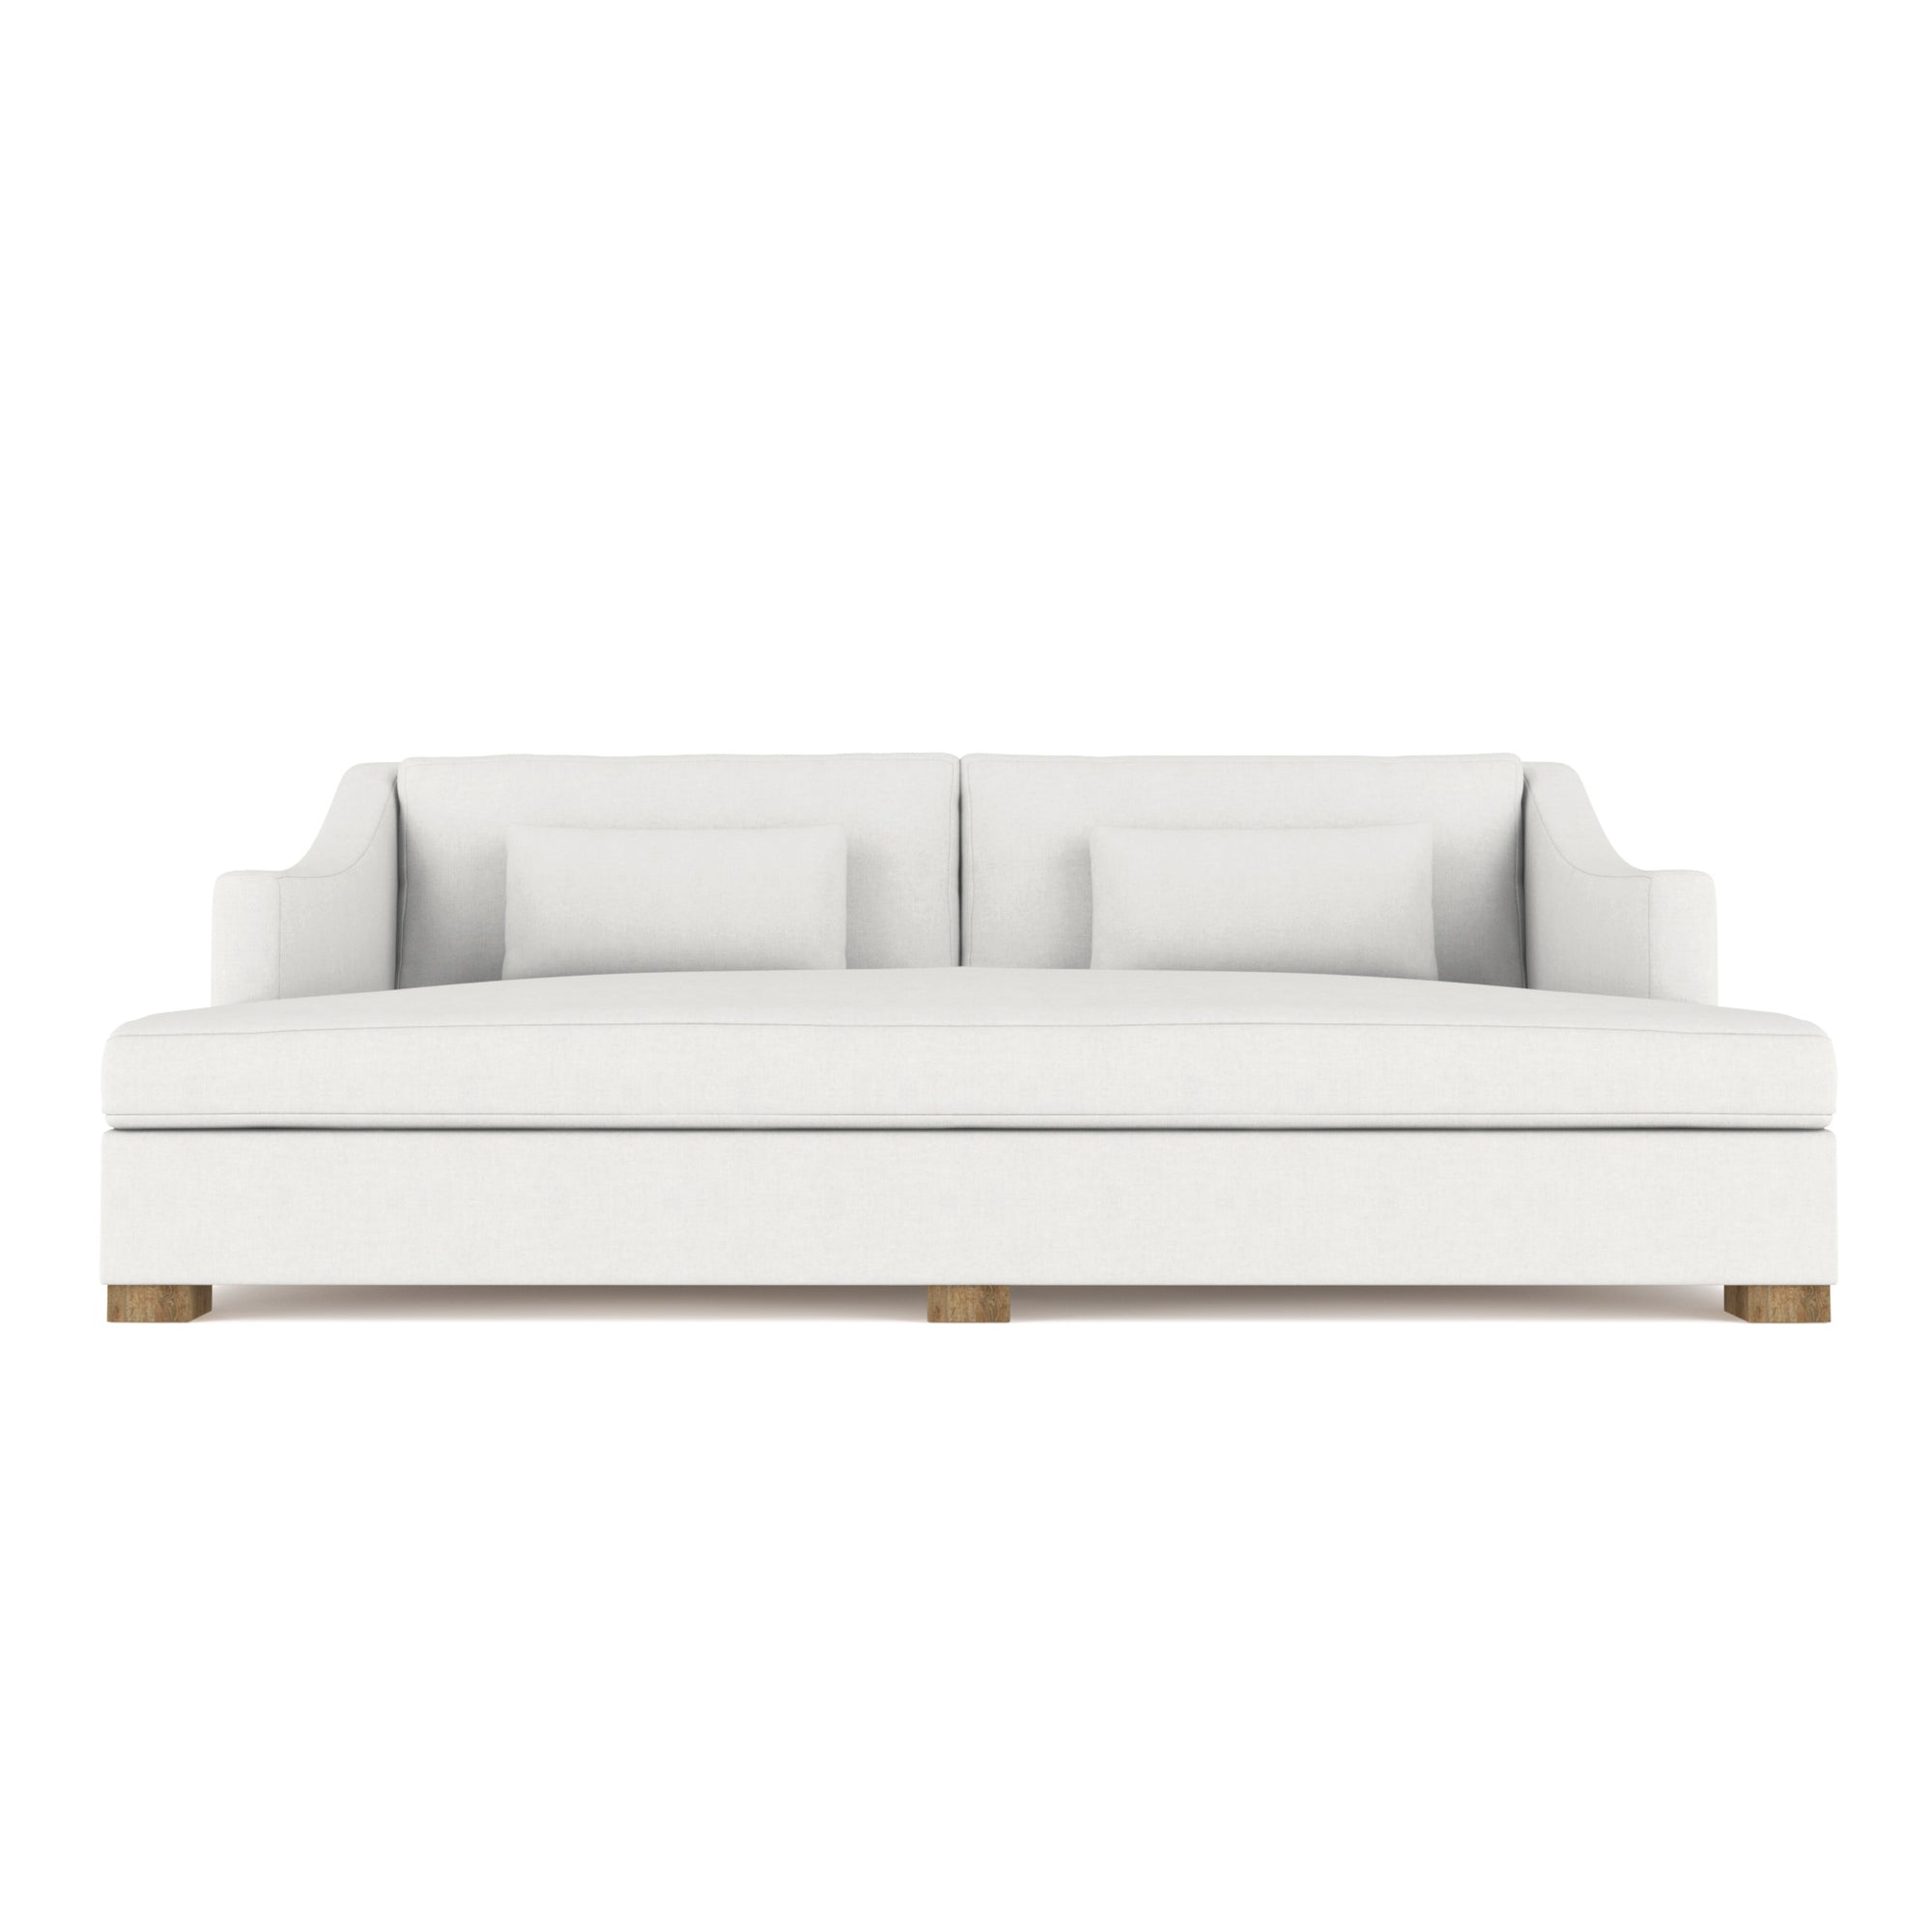 Crosby Daybed - Blanc Box Weave Linen